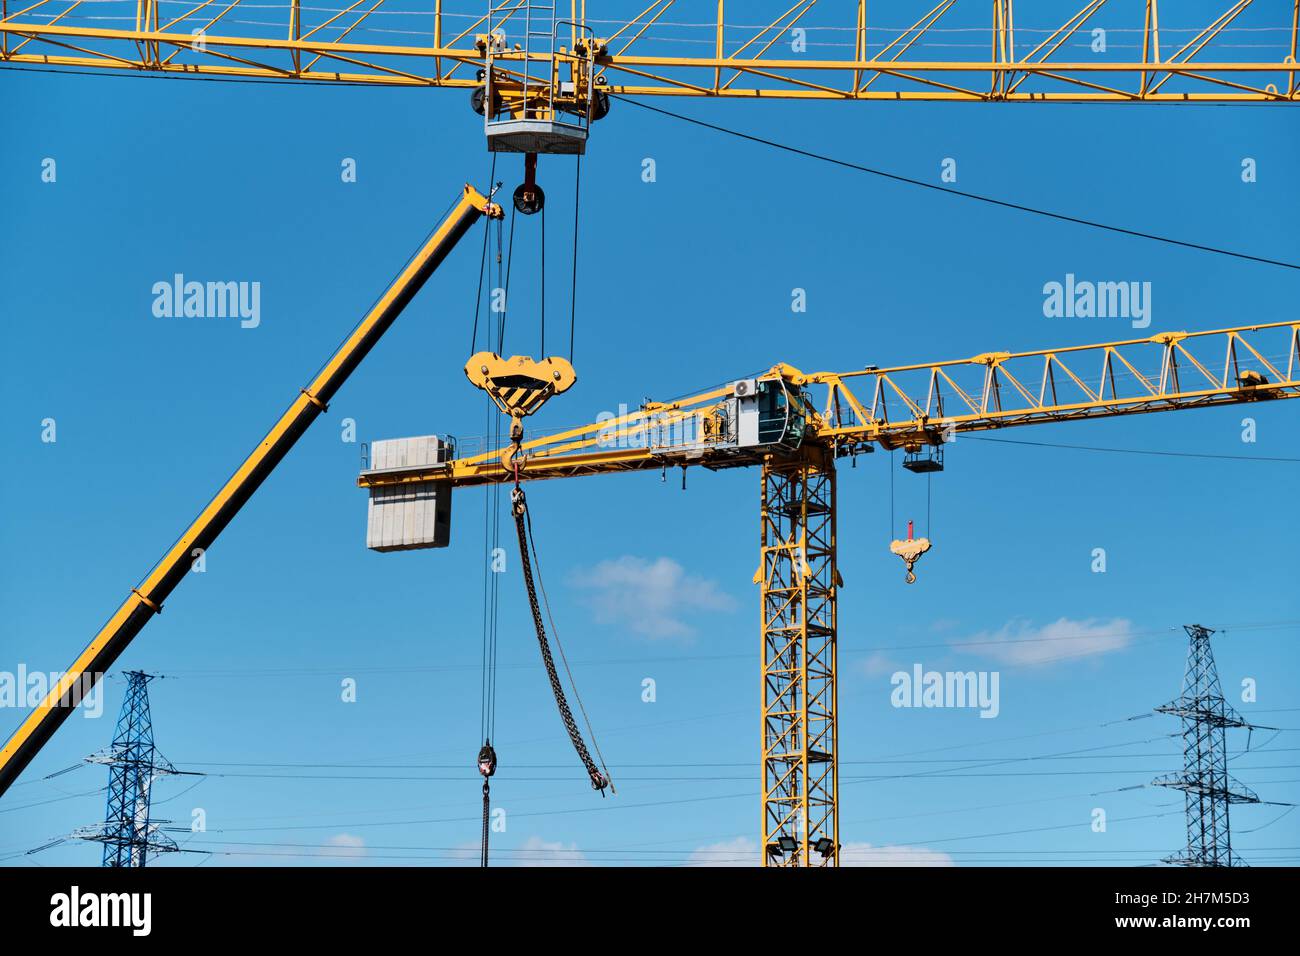 Several yellow construction cranes with hooks on chains Stock Photo - Alamy